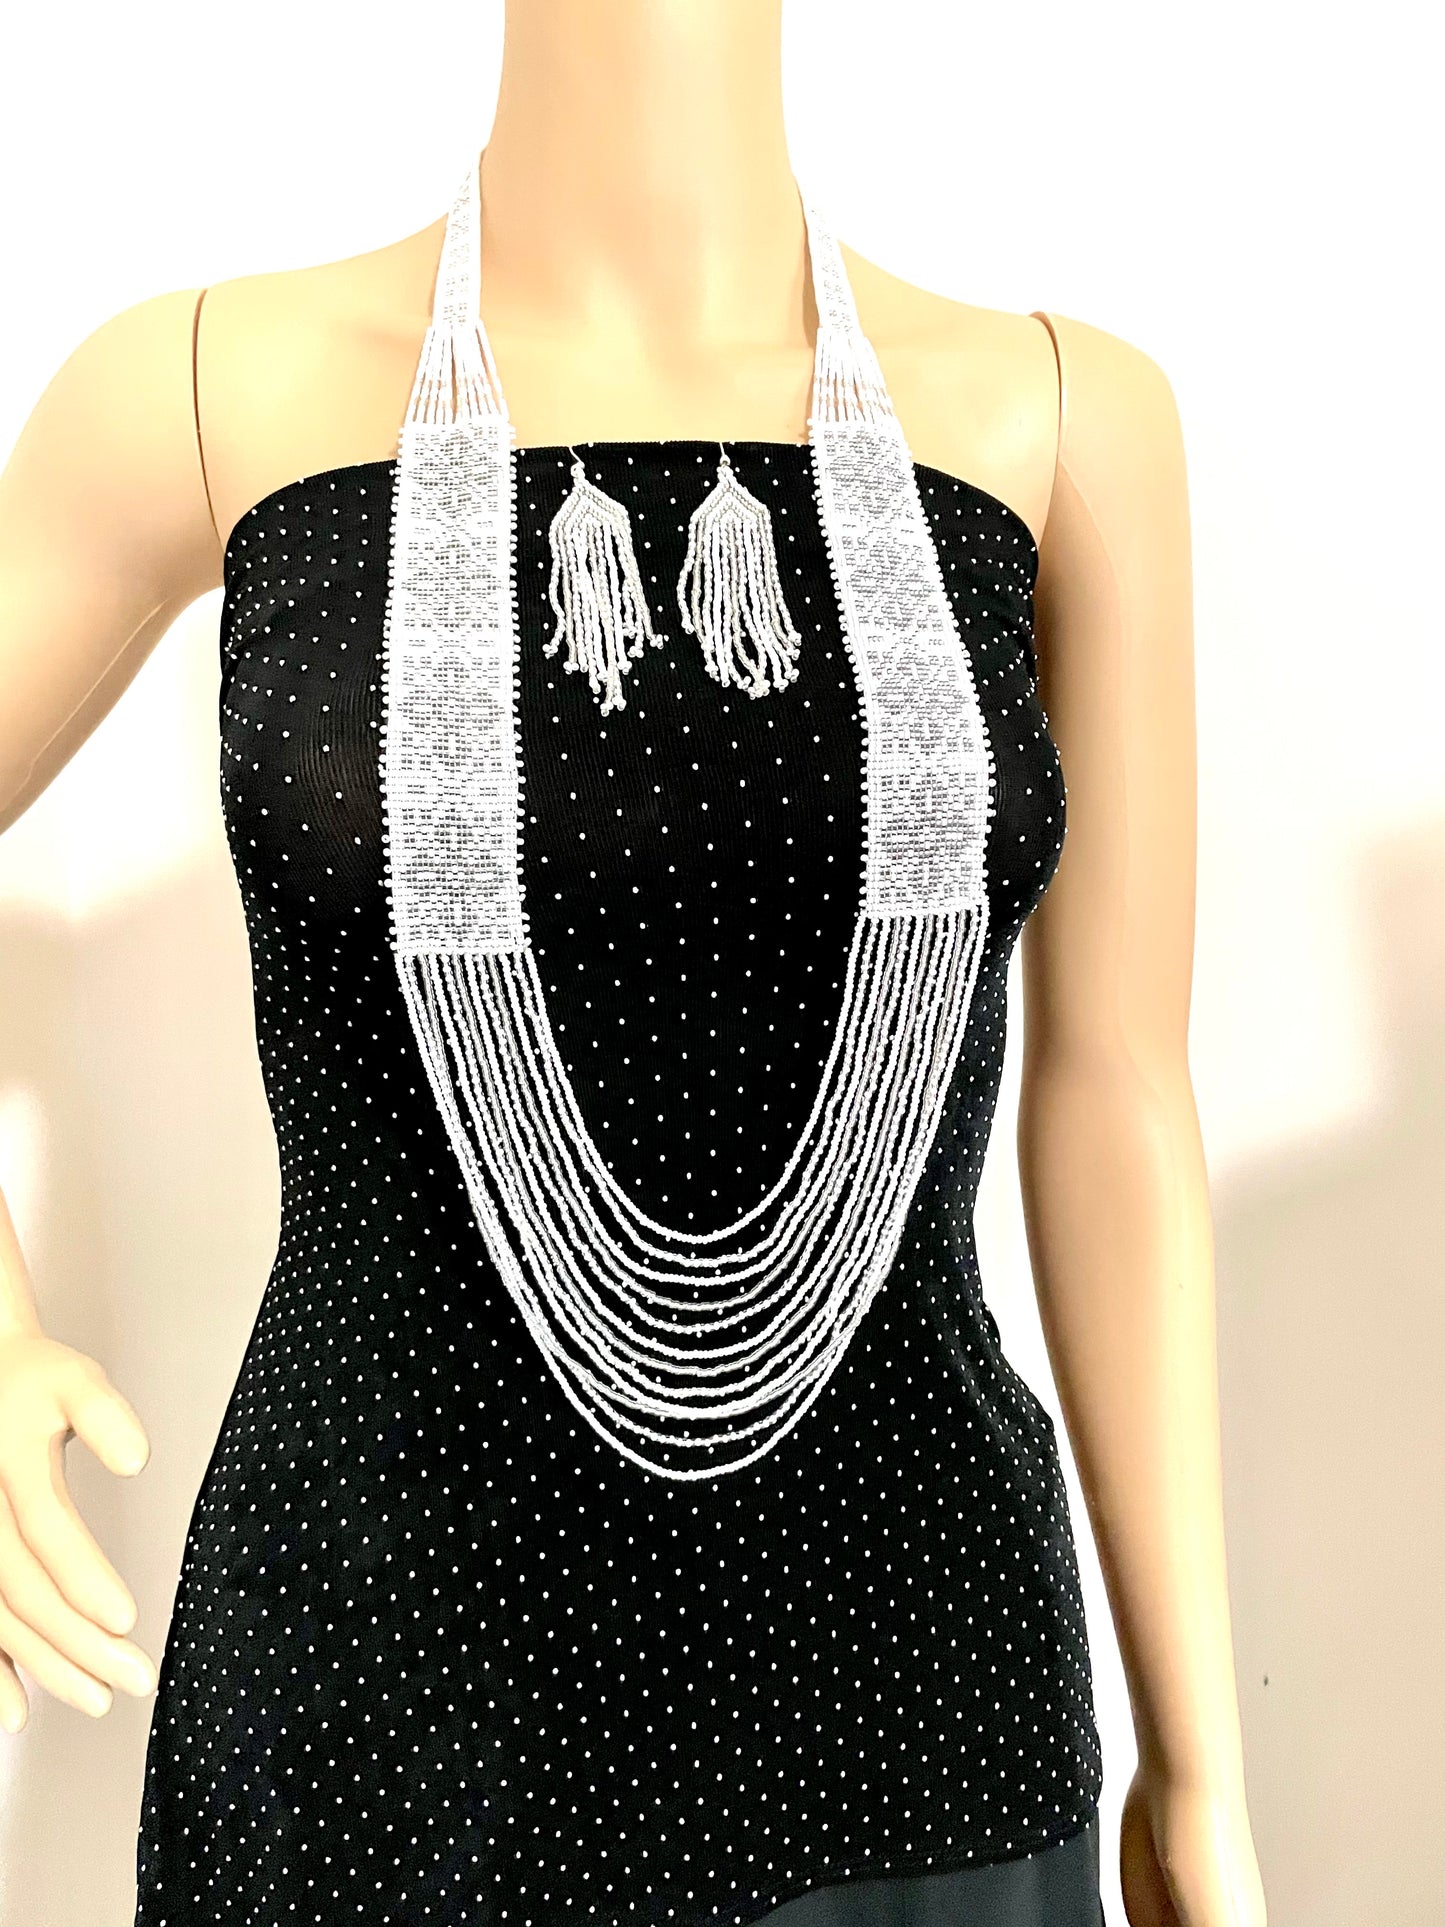 Handcrafted Seed Bead necklace earrings set African wedding jewelry